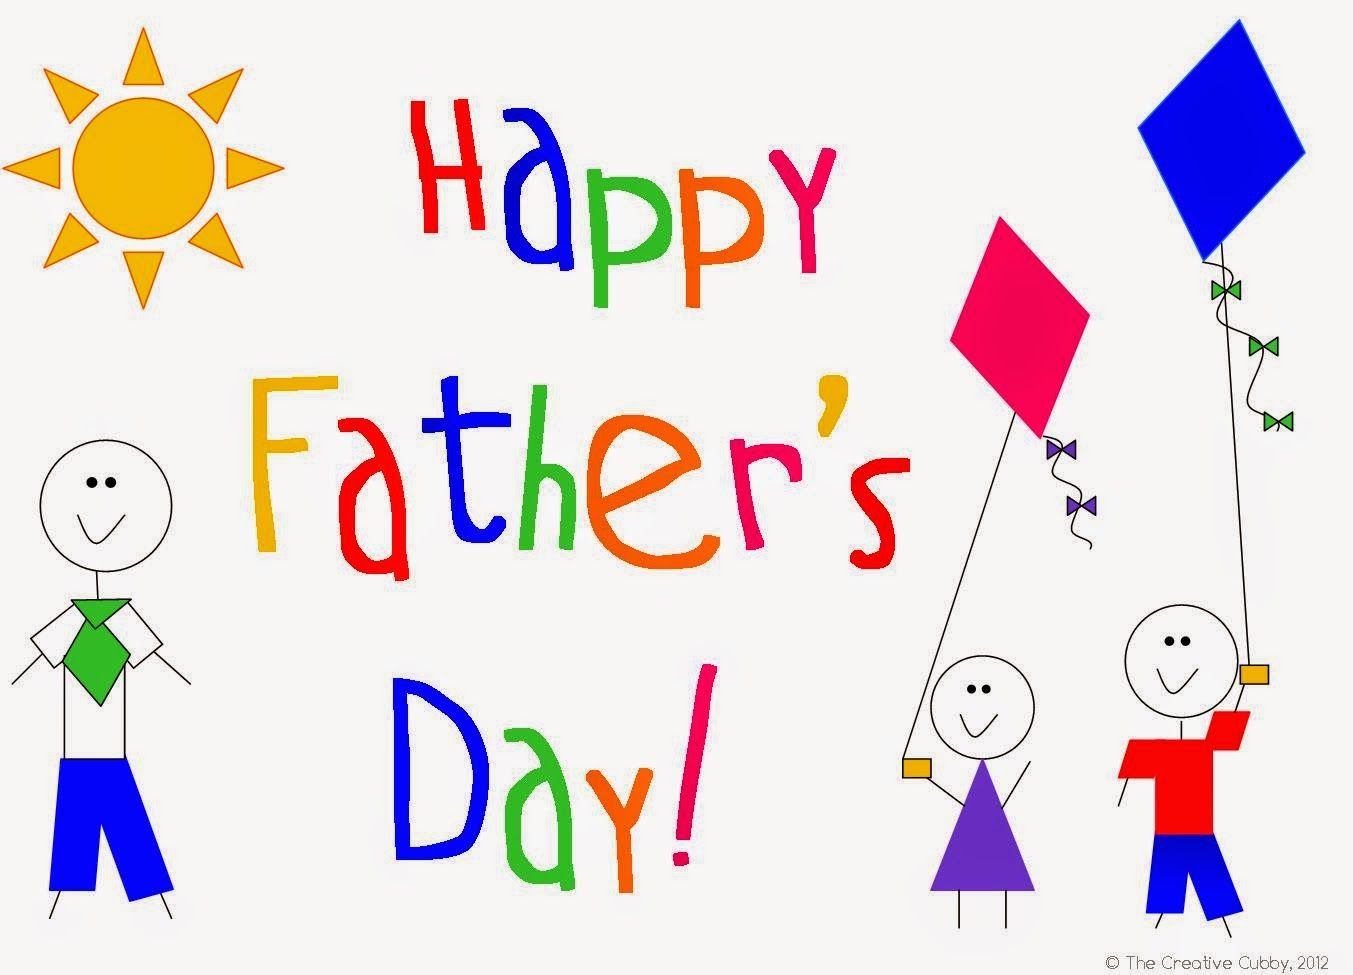 Happy Fathers Day Image download